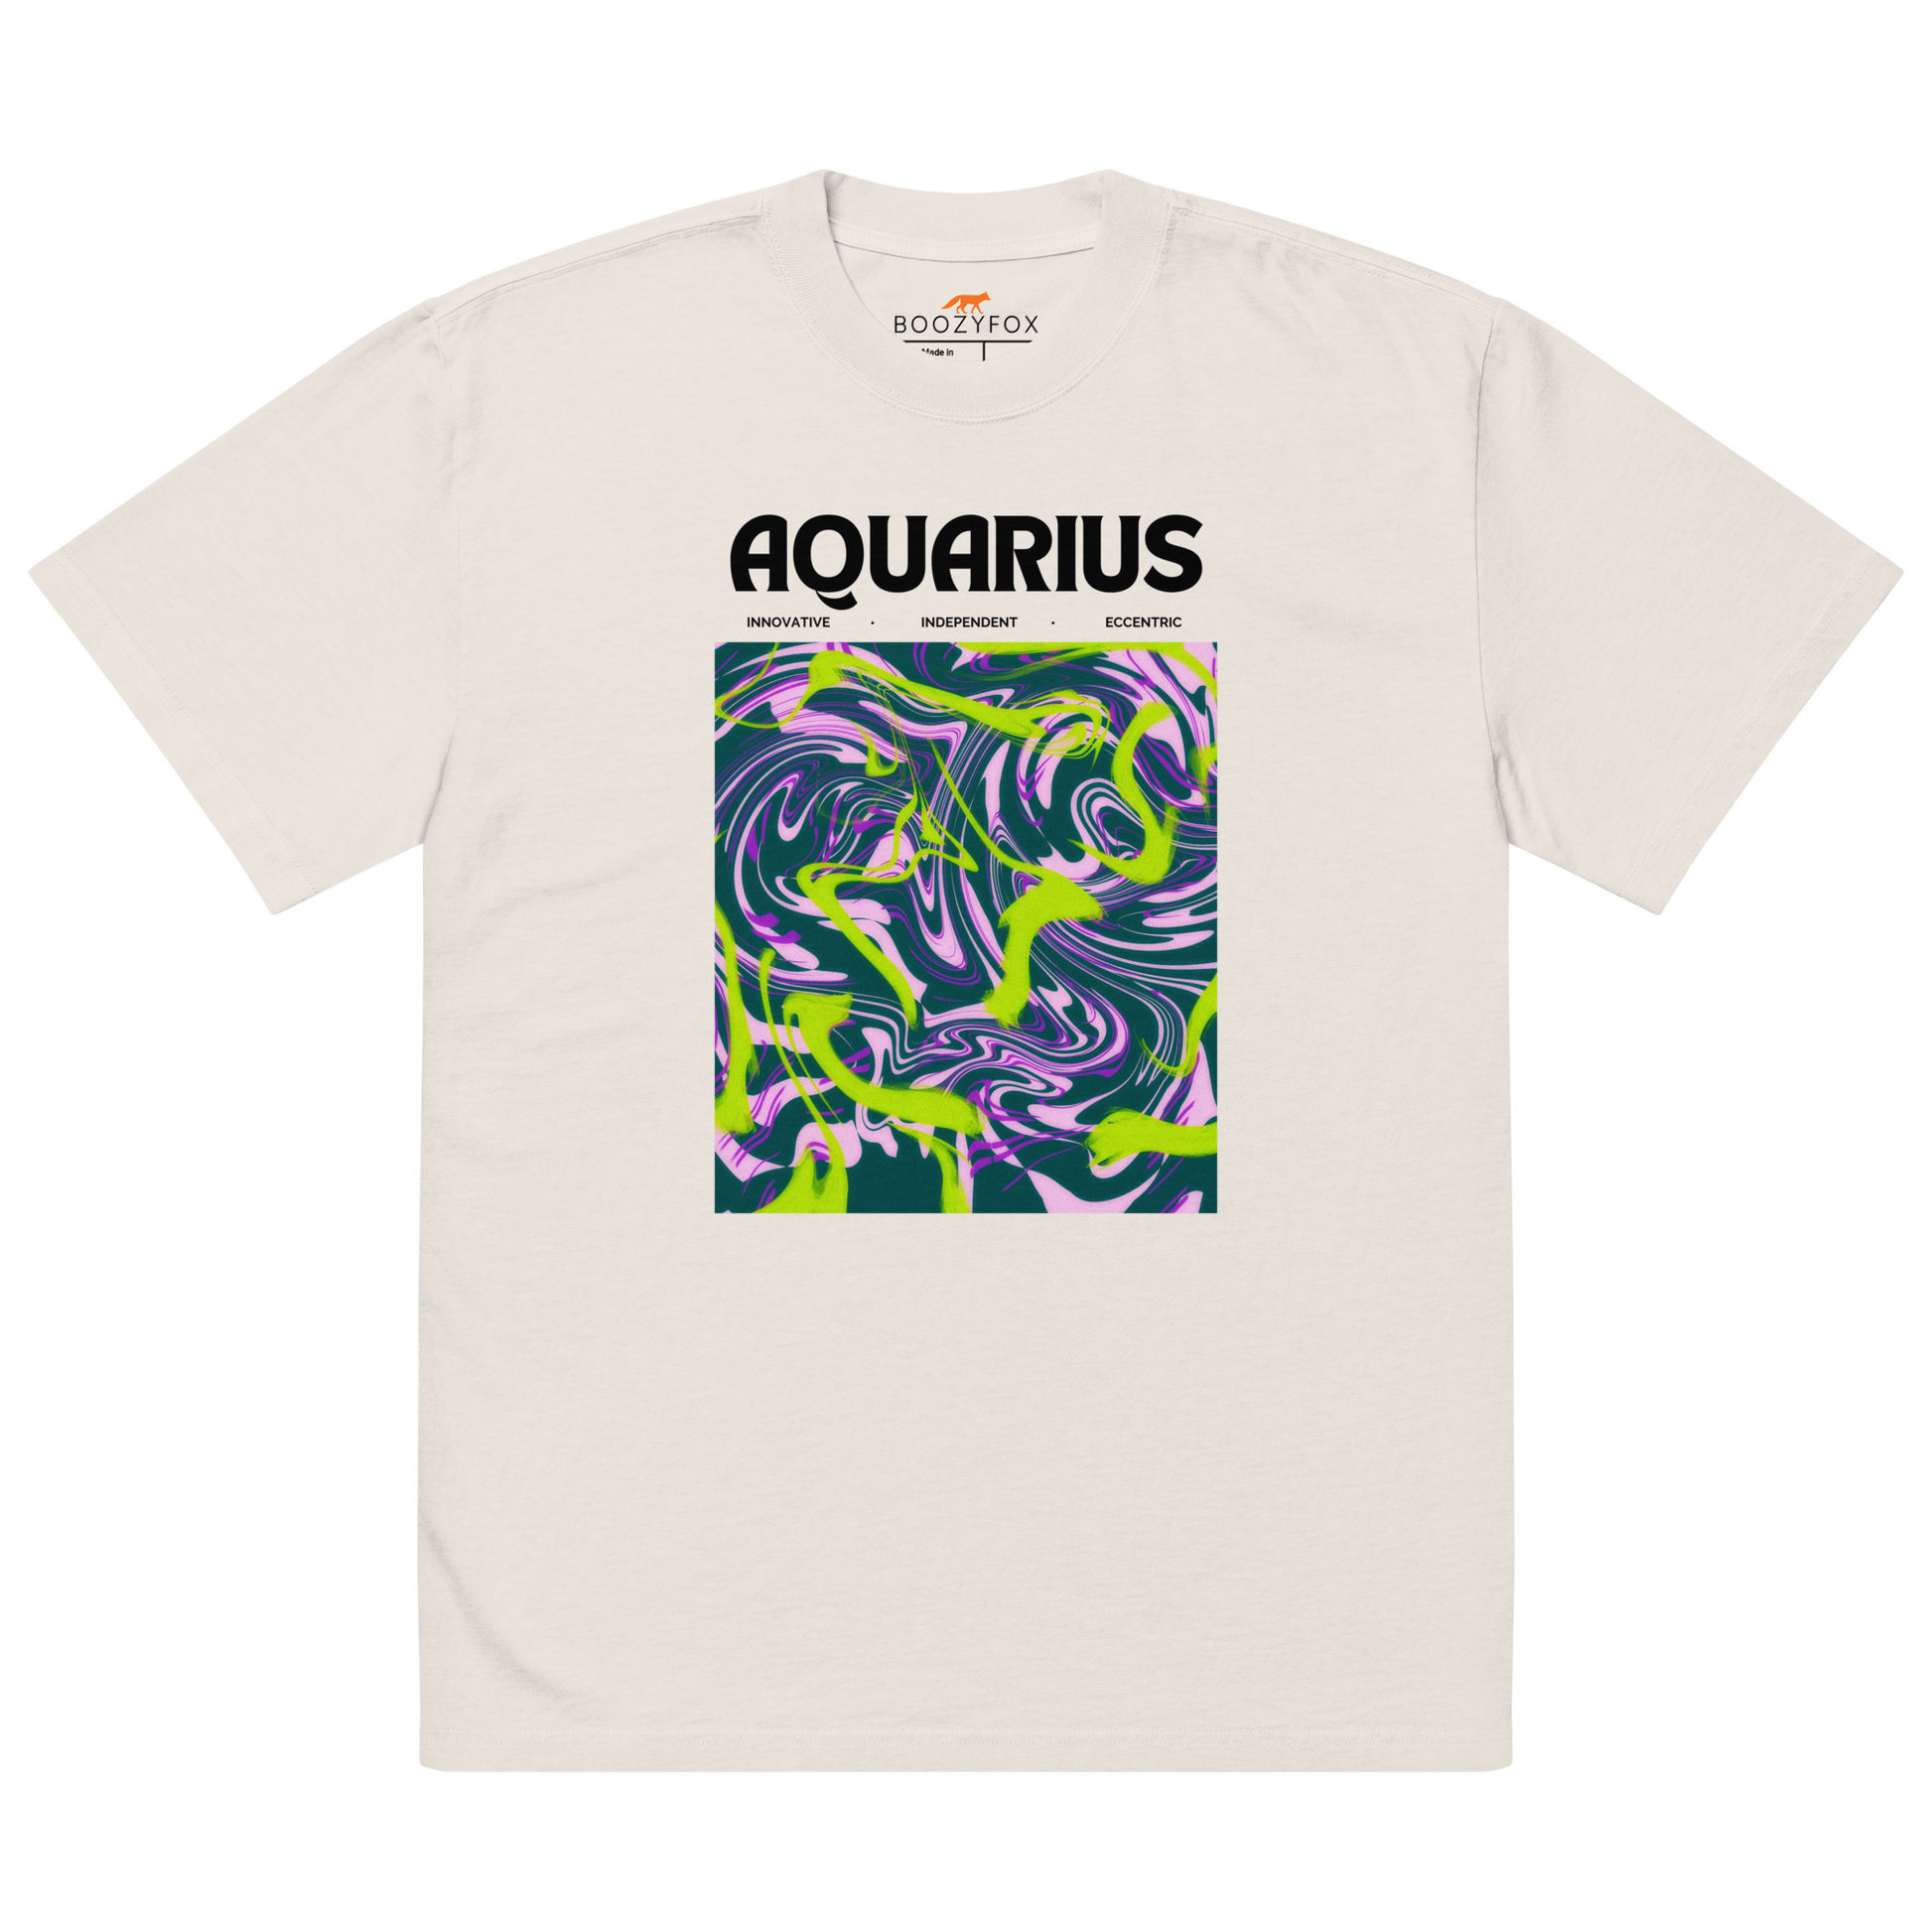 Faded Bone Aquarius Oversized T-Shirt featuring an Abstract Aquarius Star Sign graphic on the chest - Cool Graphic Zodiac Oversized Tees - Boozy Fox